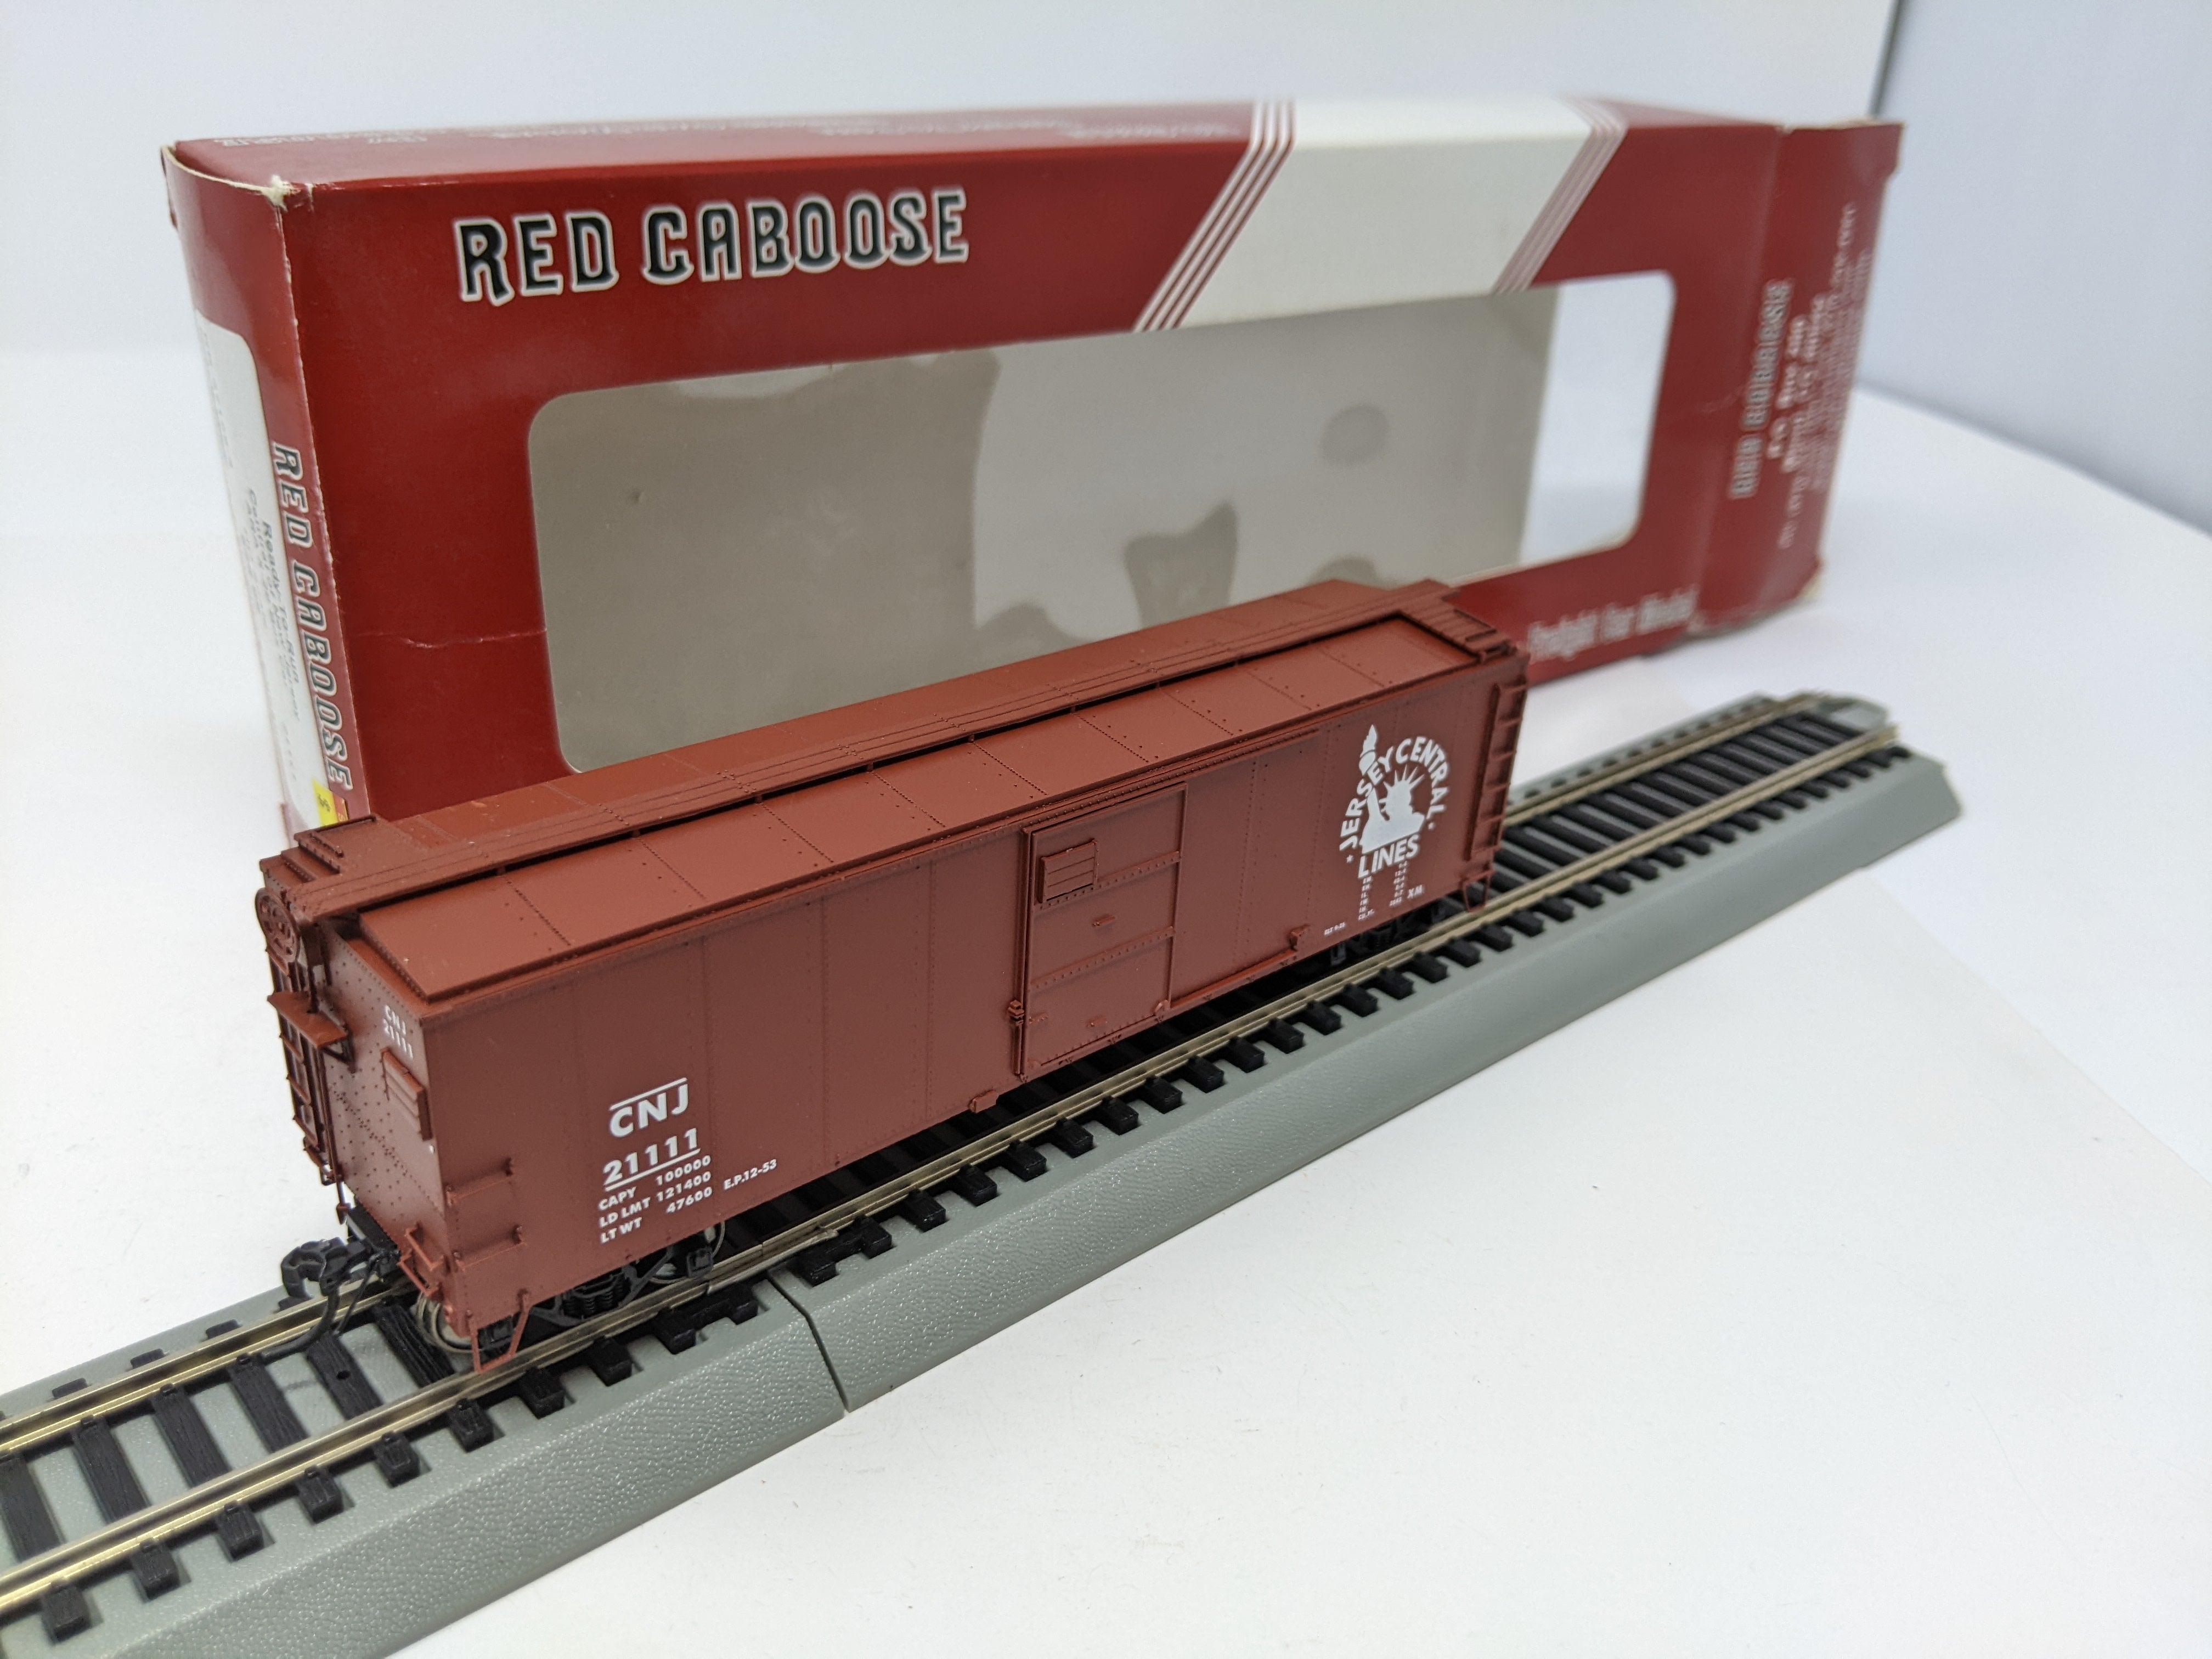 USED Red Caboose HO Scale, ARA X-29 Box Car, Jersey Central Lines CNJ #21111, Read Description